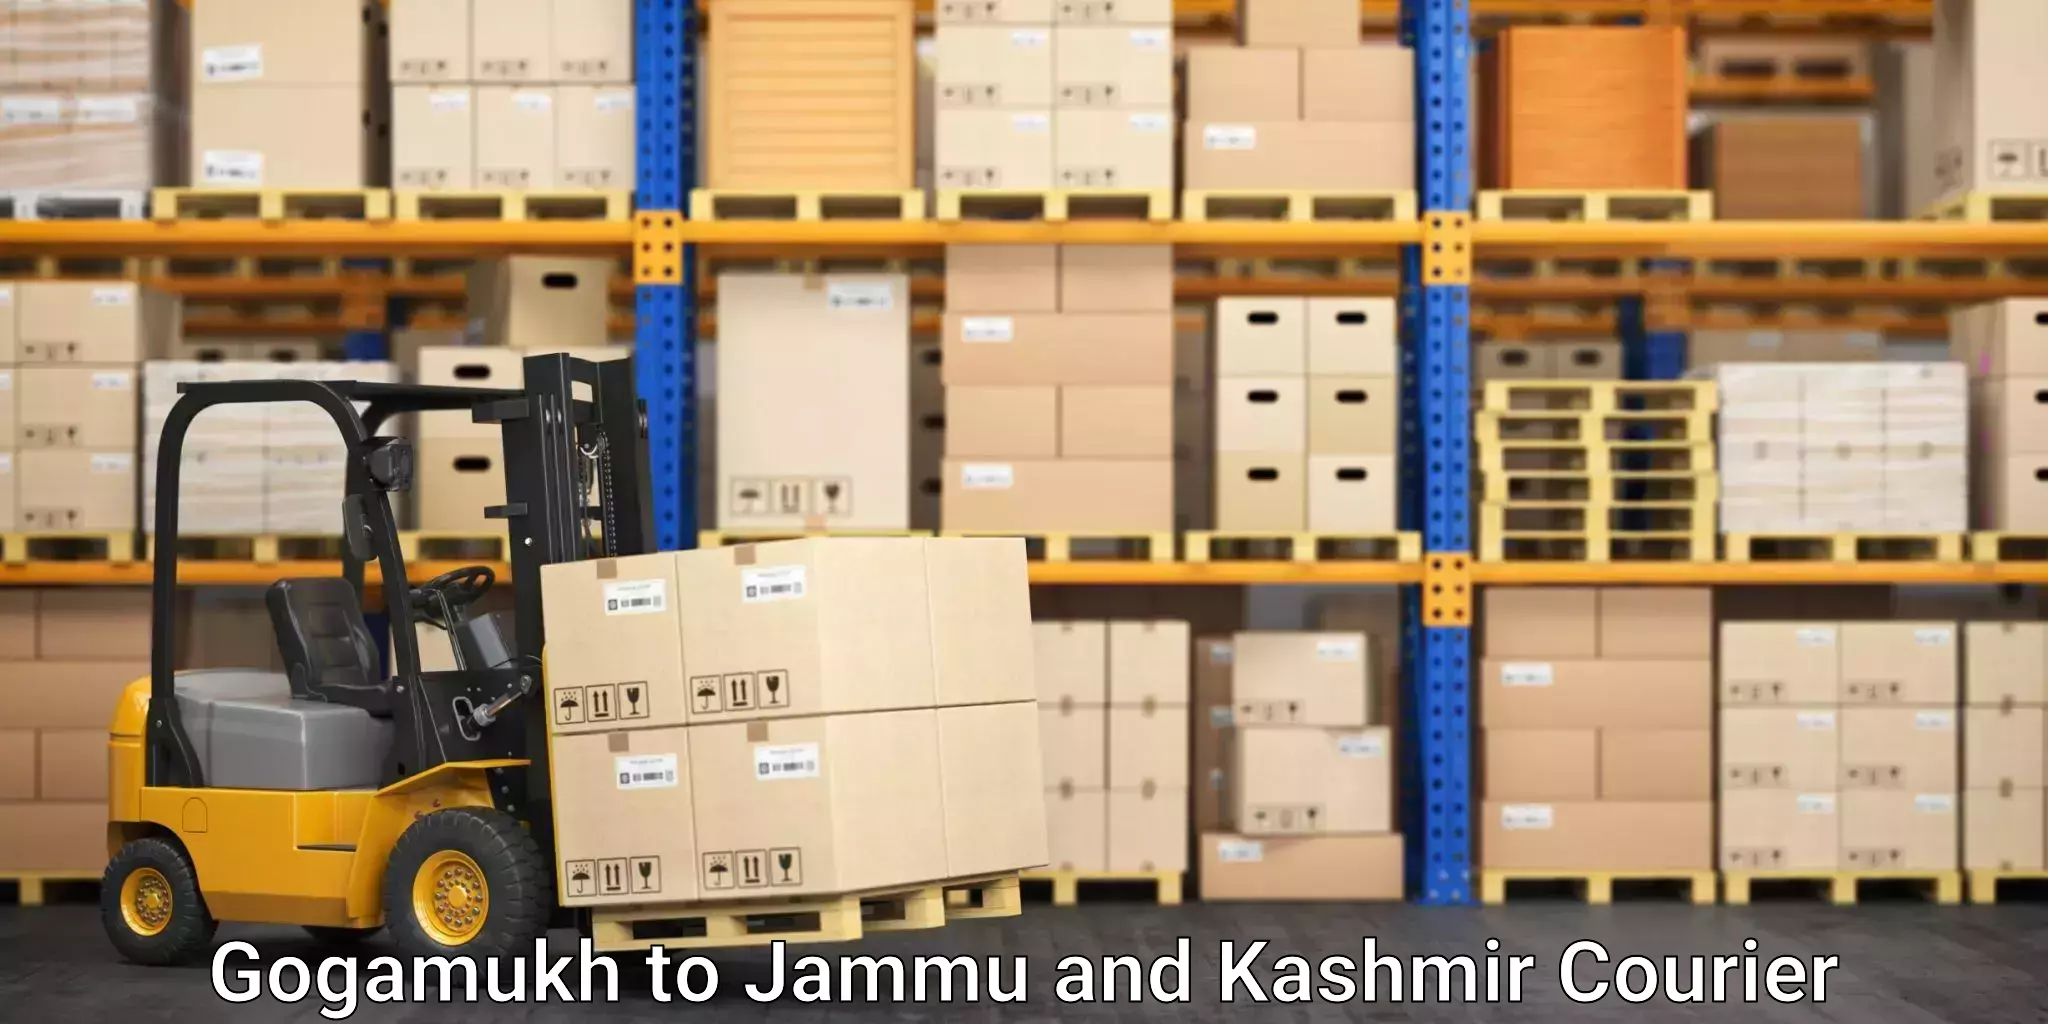 Secure freight services Gogamukh to Shopian